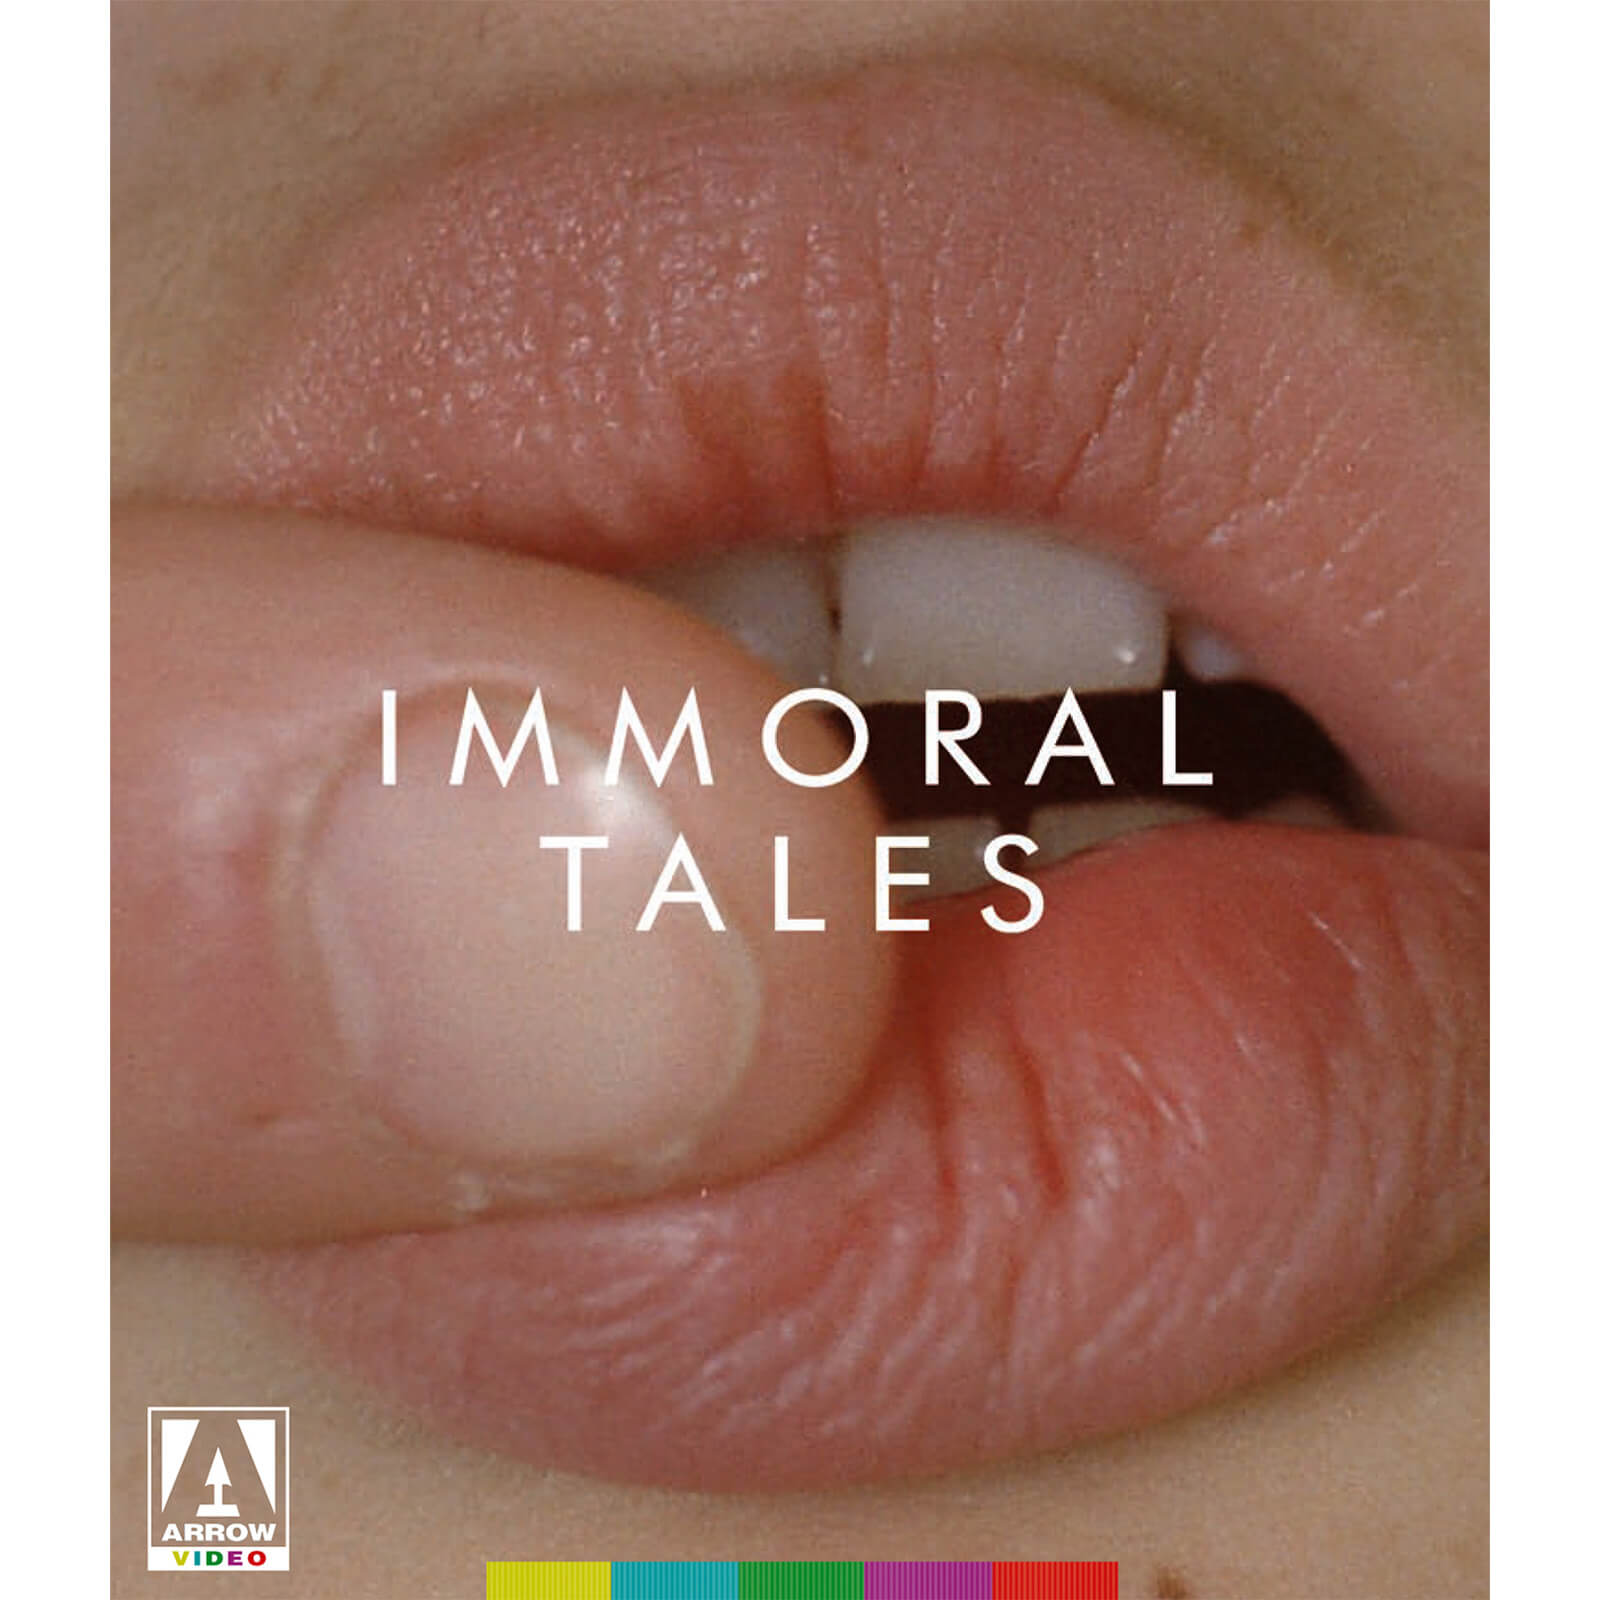 Immoral Tales (Includes DVD)